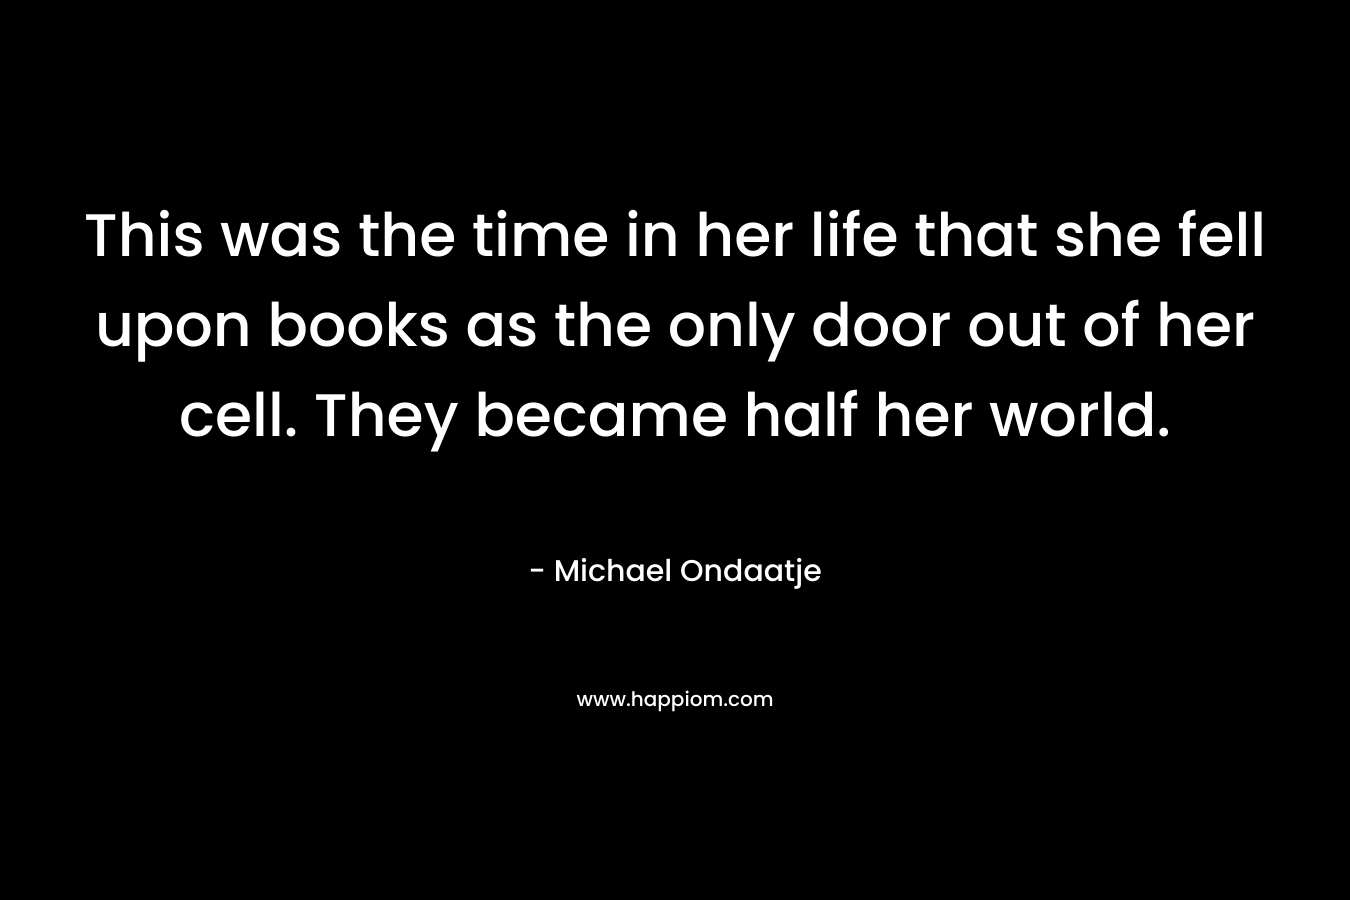 This was the time in her life that she fell upon books as the only door out of her cell. They became half her world.